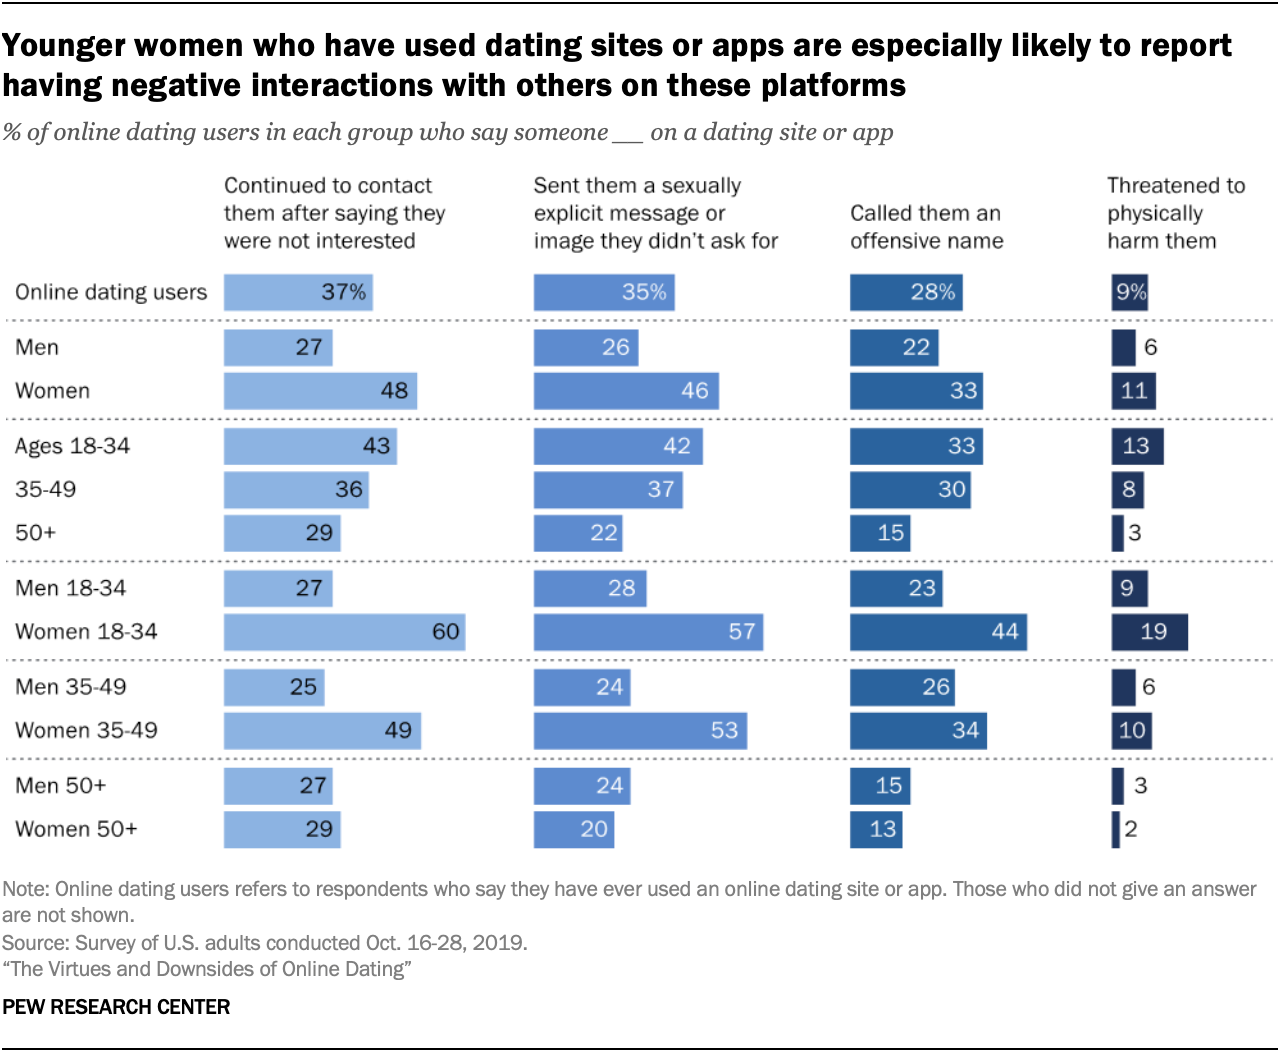 Younger women who have used dating sites or apps are especially likely to report having negative interactions with others on these platforms